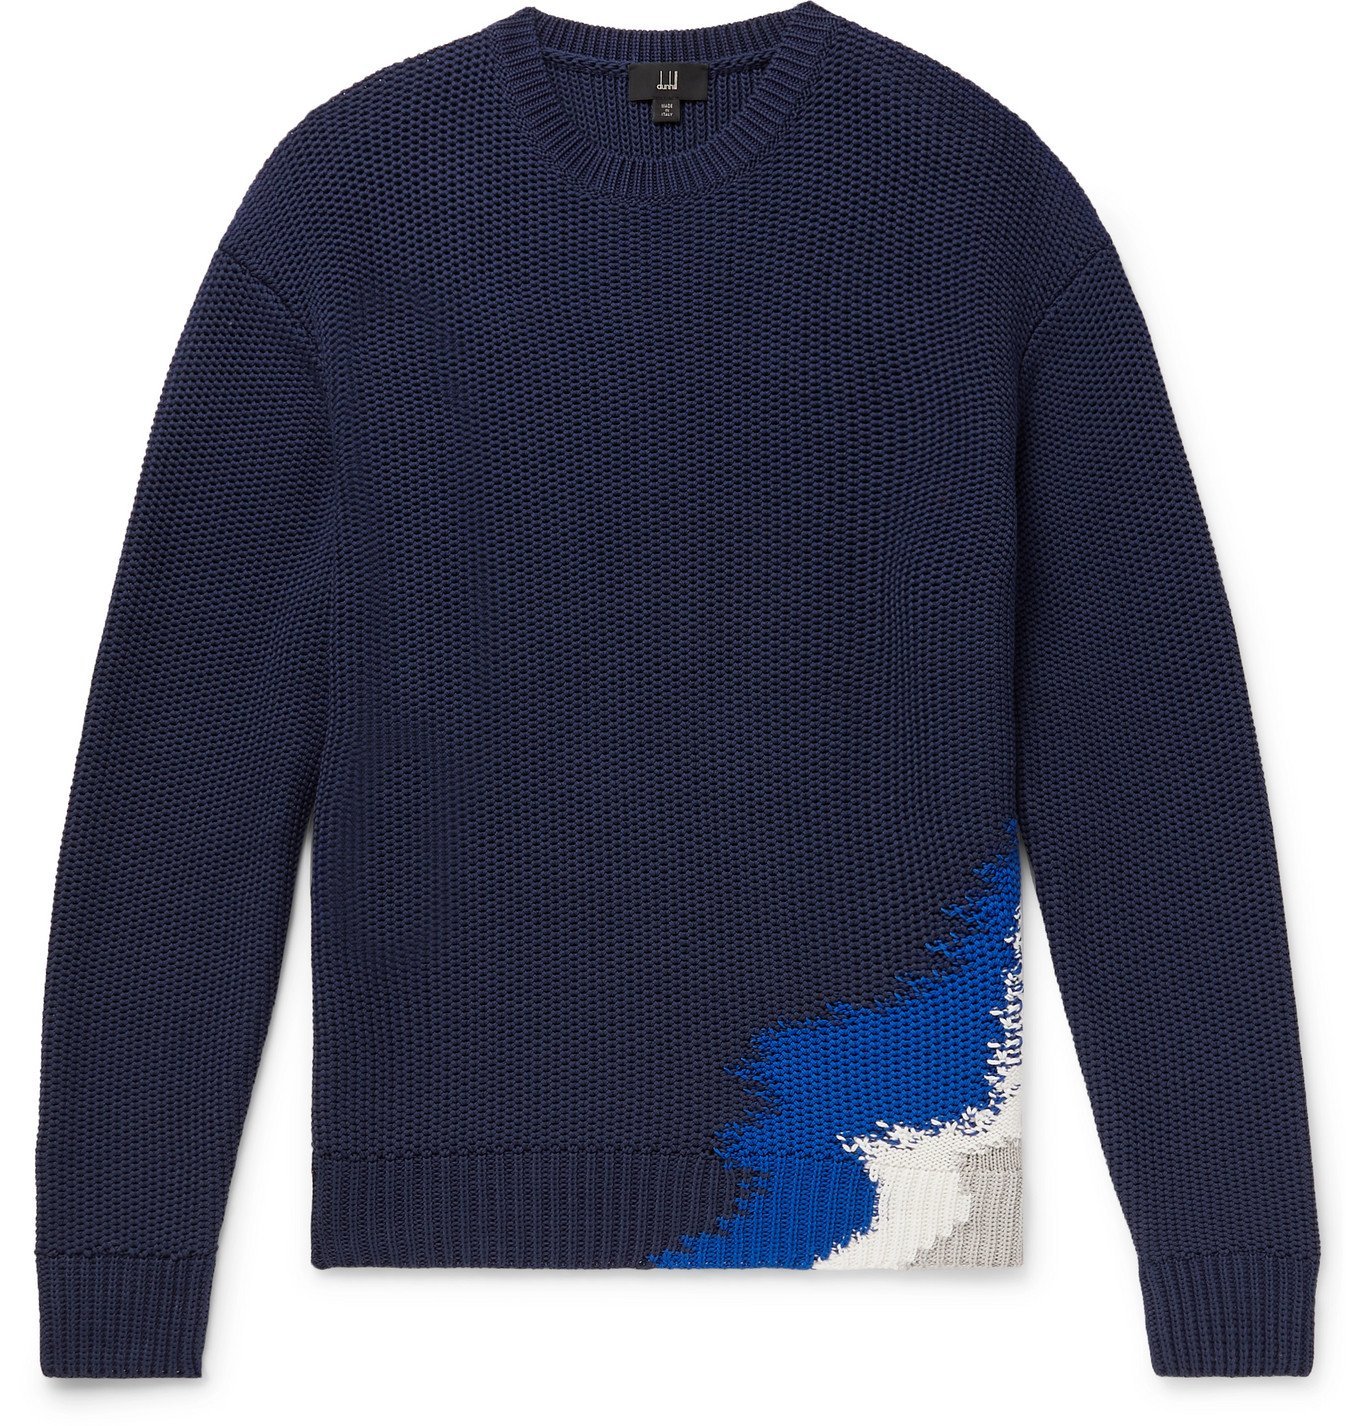 DUNHILL - Intarsia Cotton Sweater - Blue Dunhill